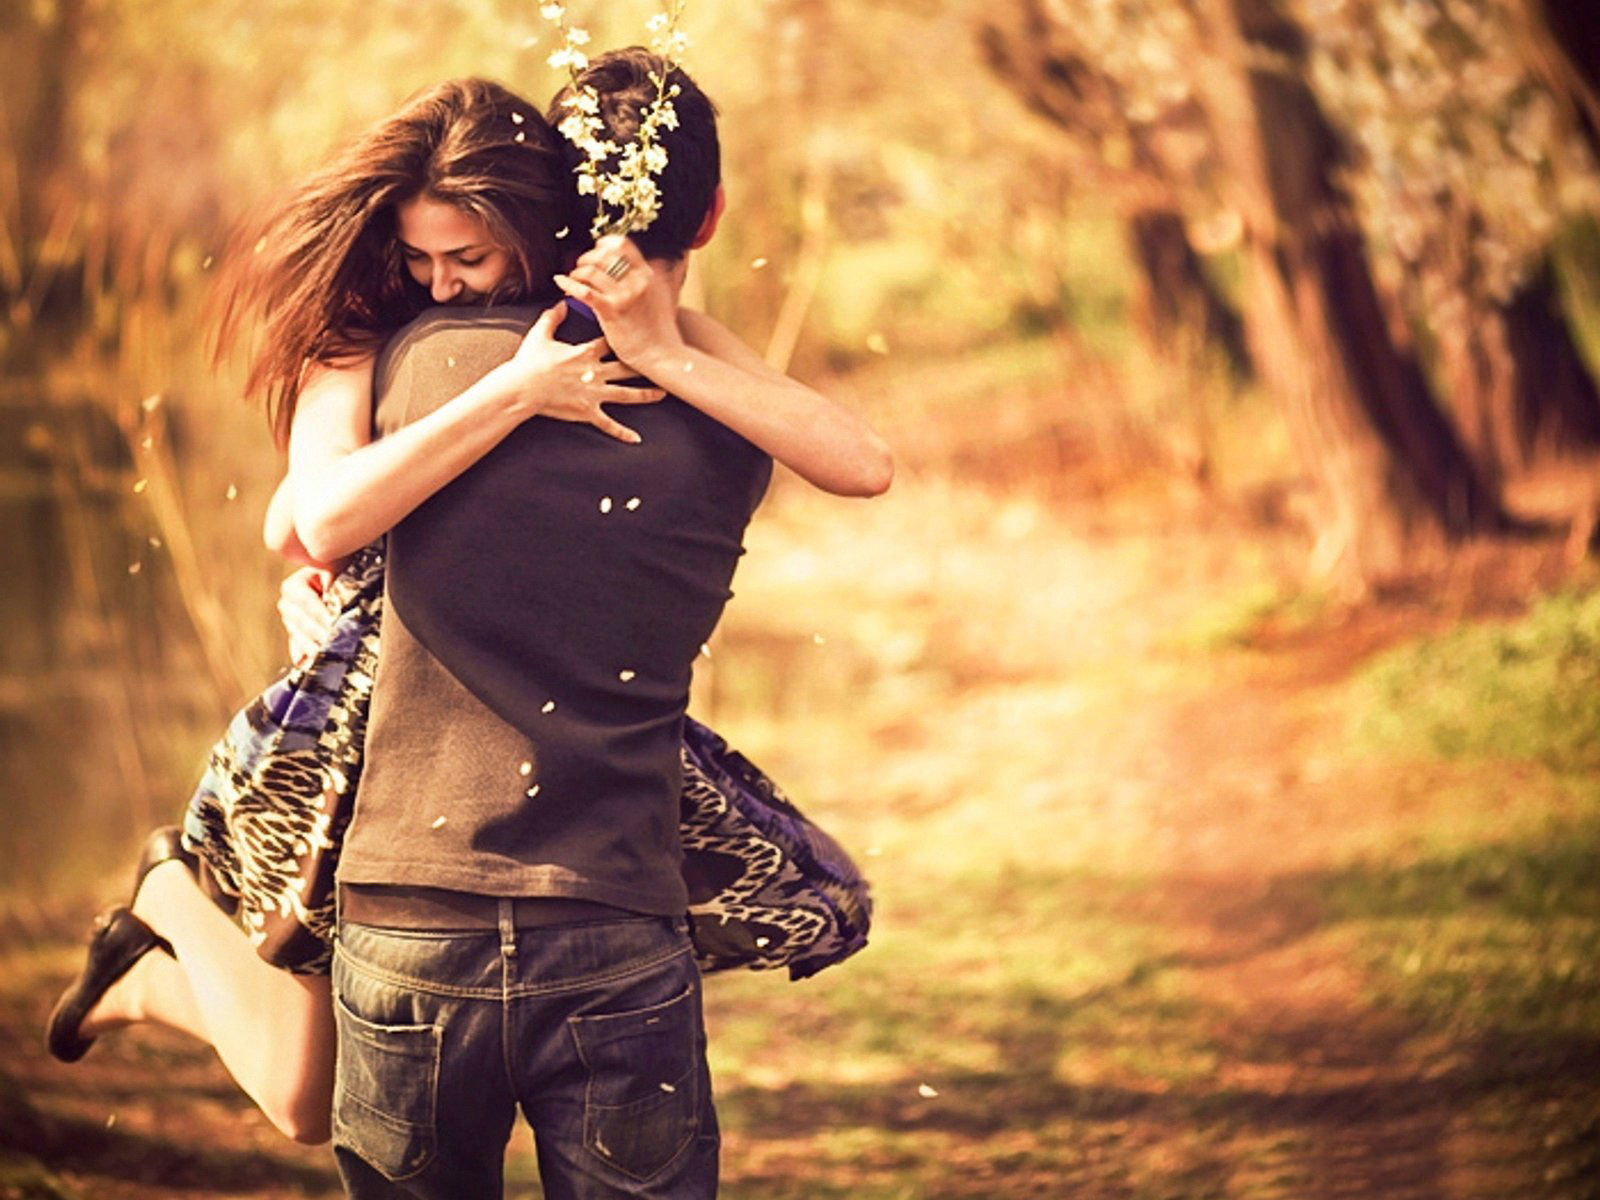 Romantic Couples Wallpapers Pictures Images - Riset